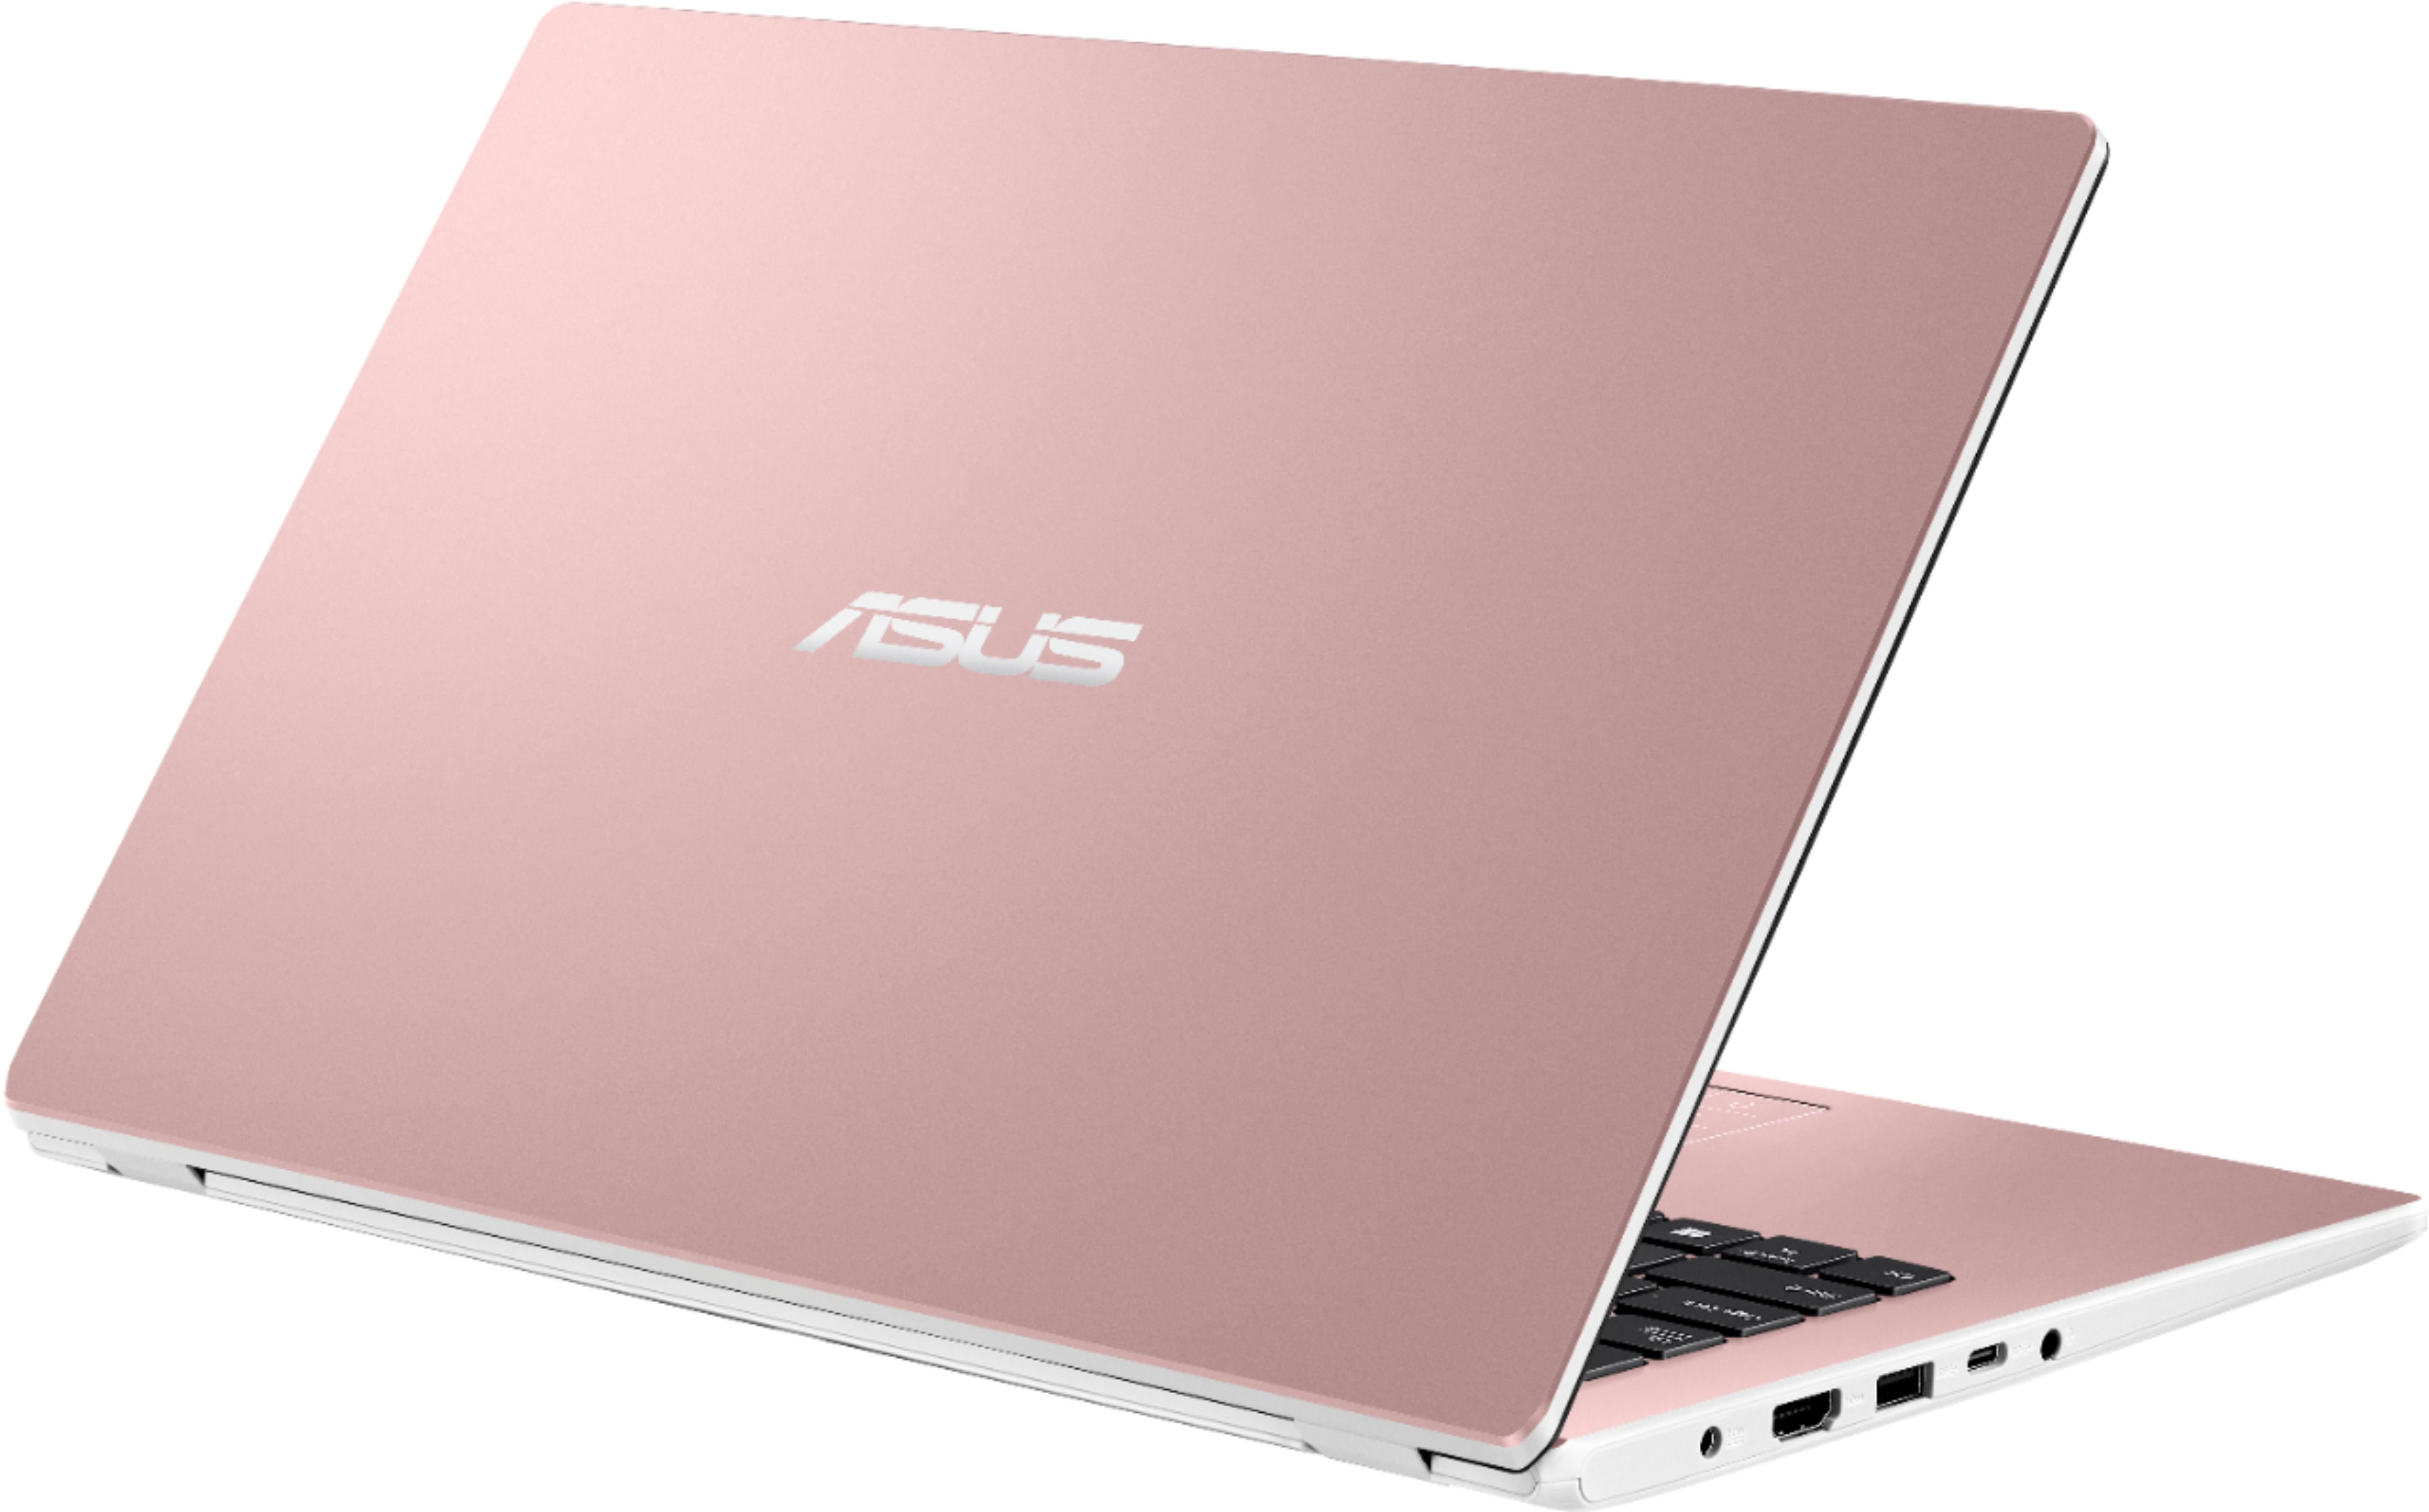 Questions And Answers Asus 140 Laptop Intel Celeron N4020 4gb Memory 64gb Emmc Rose Gold 7846